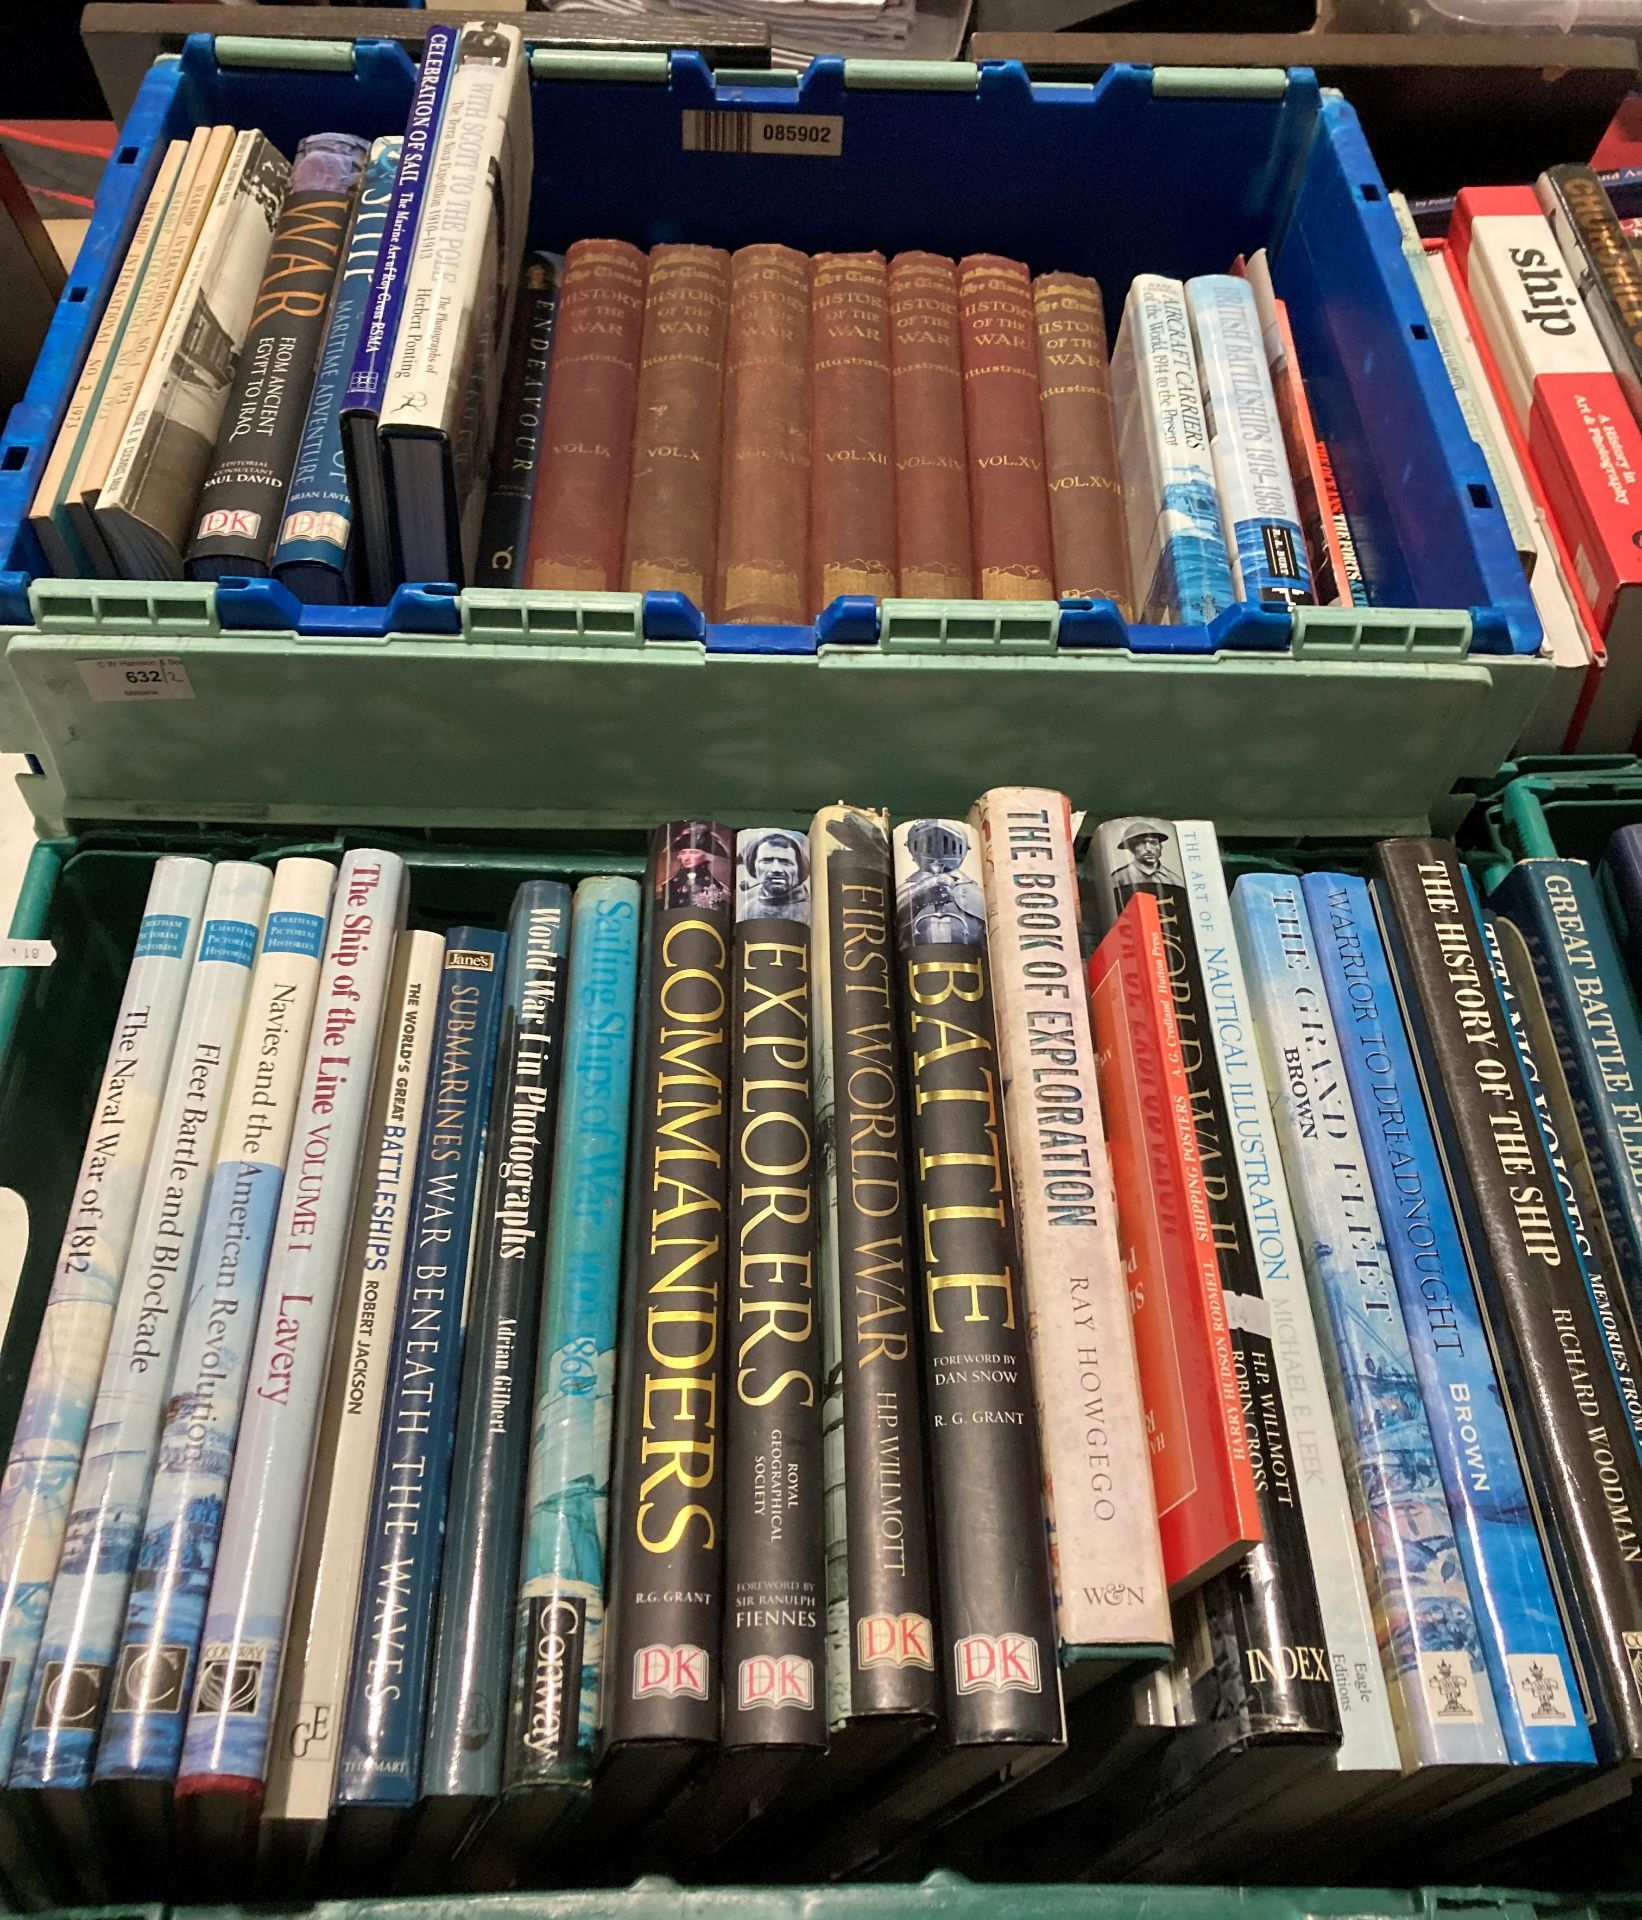 Contents to two green plastic crates - 42 books related to exploration, warfare etc.